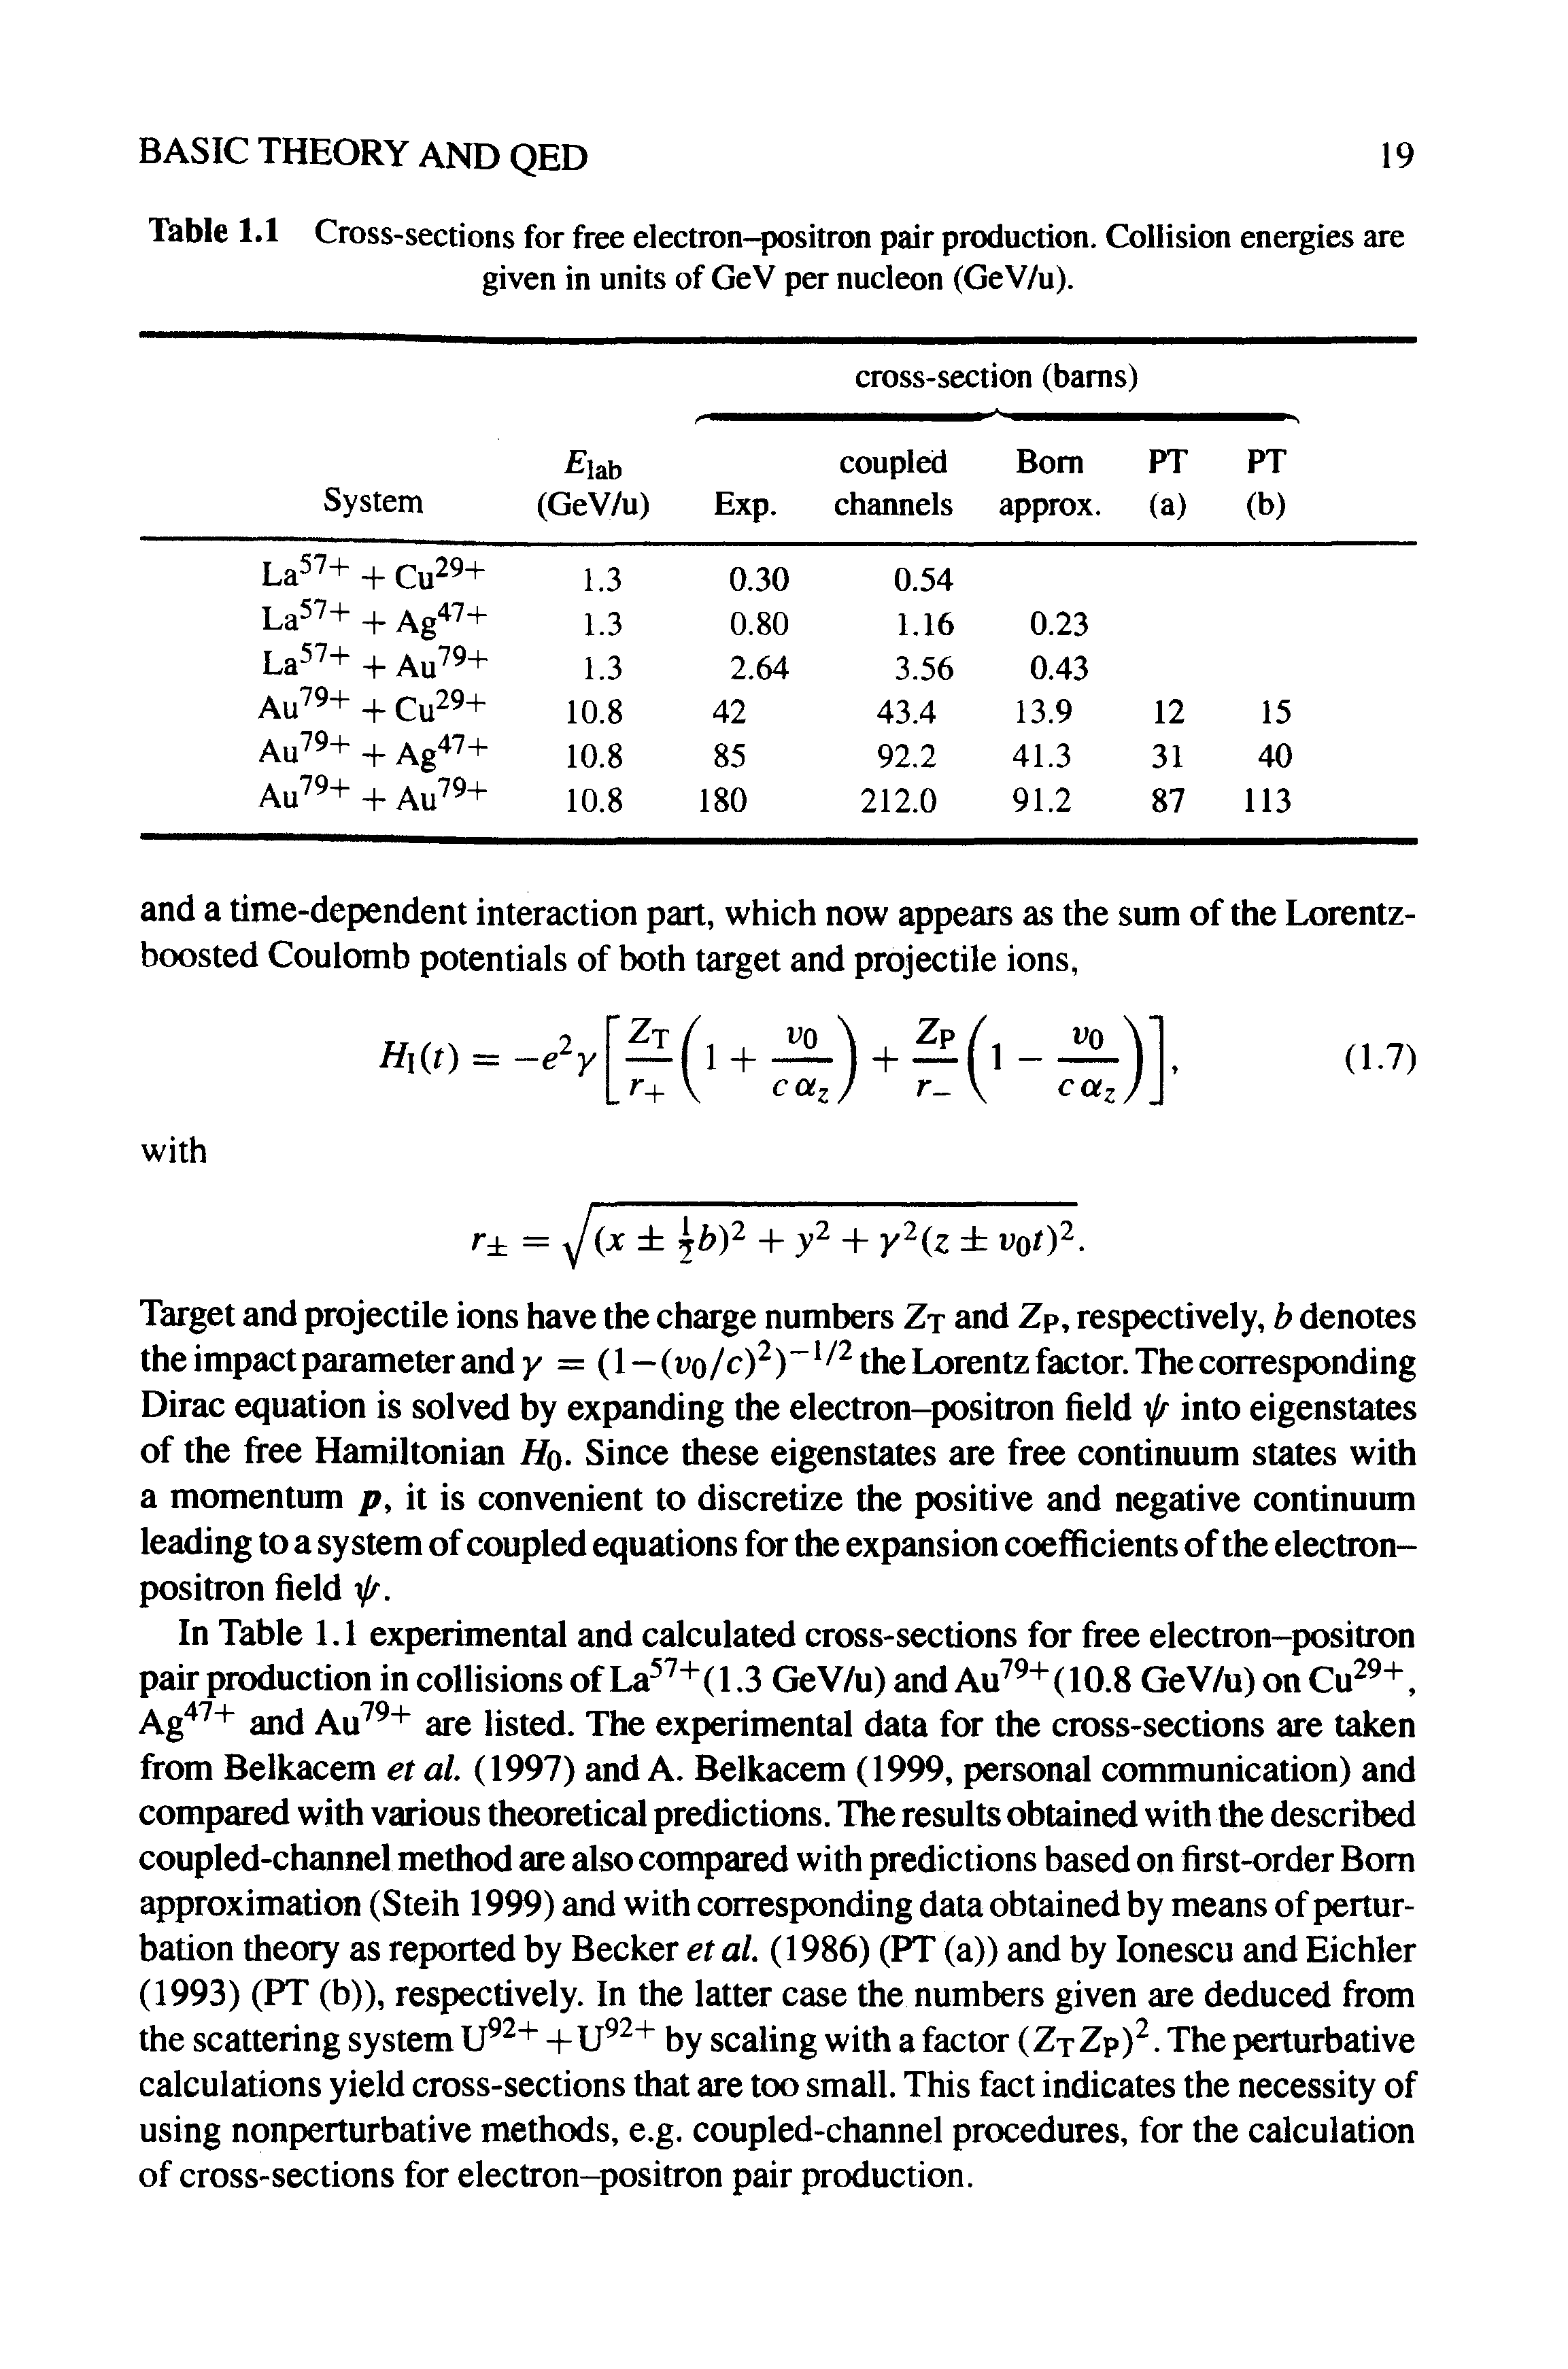 Table 1.1 Cross-sections for free electron-positron pair production. Collision energies are given in units of GeV per nucleon (GeV/u).